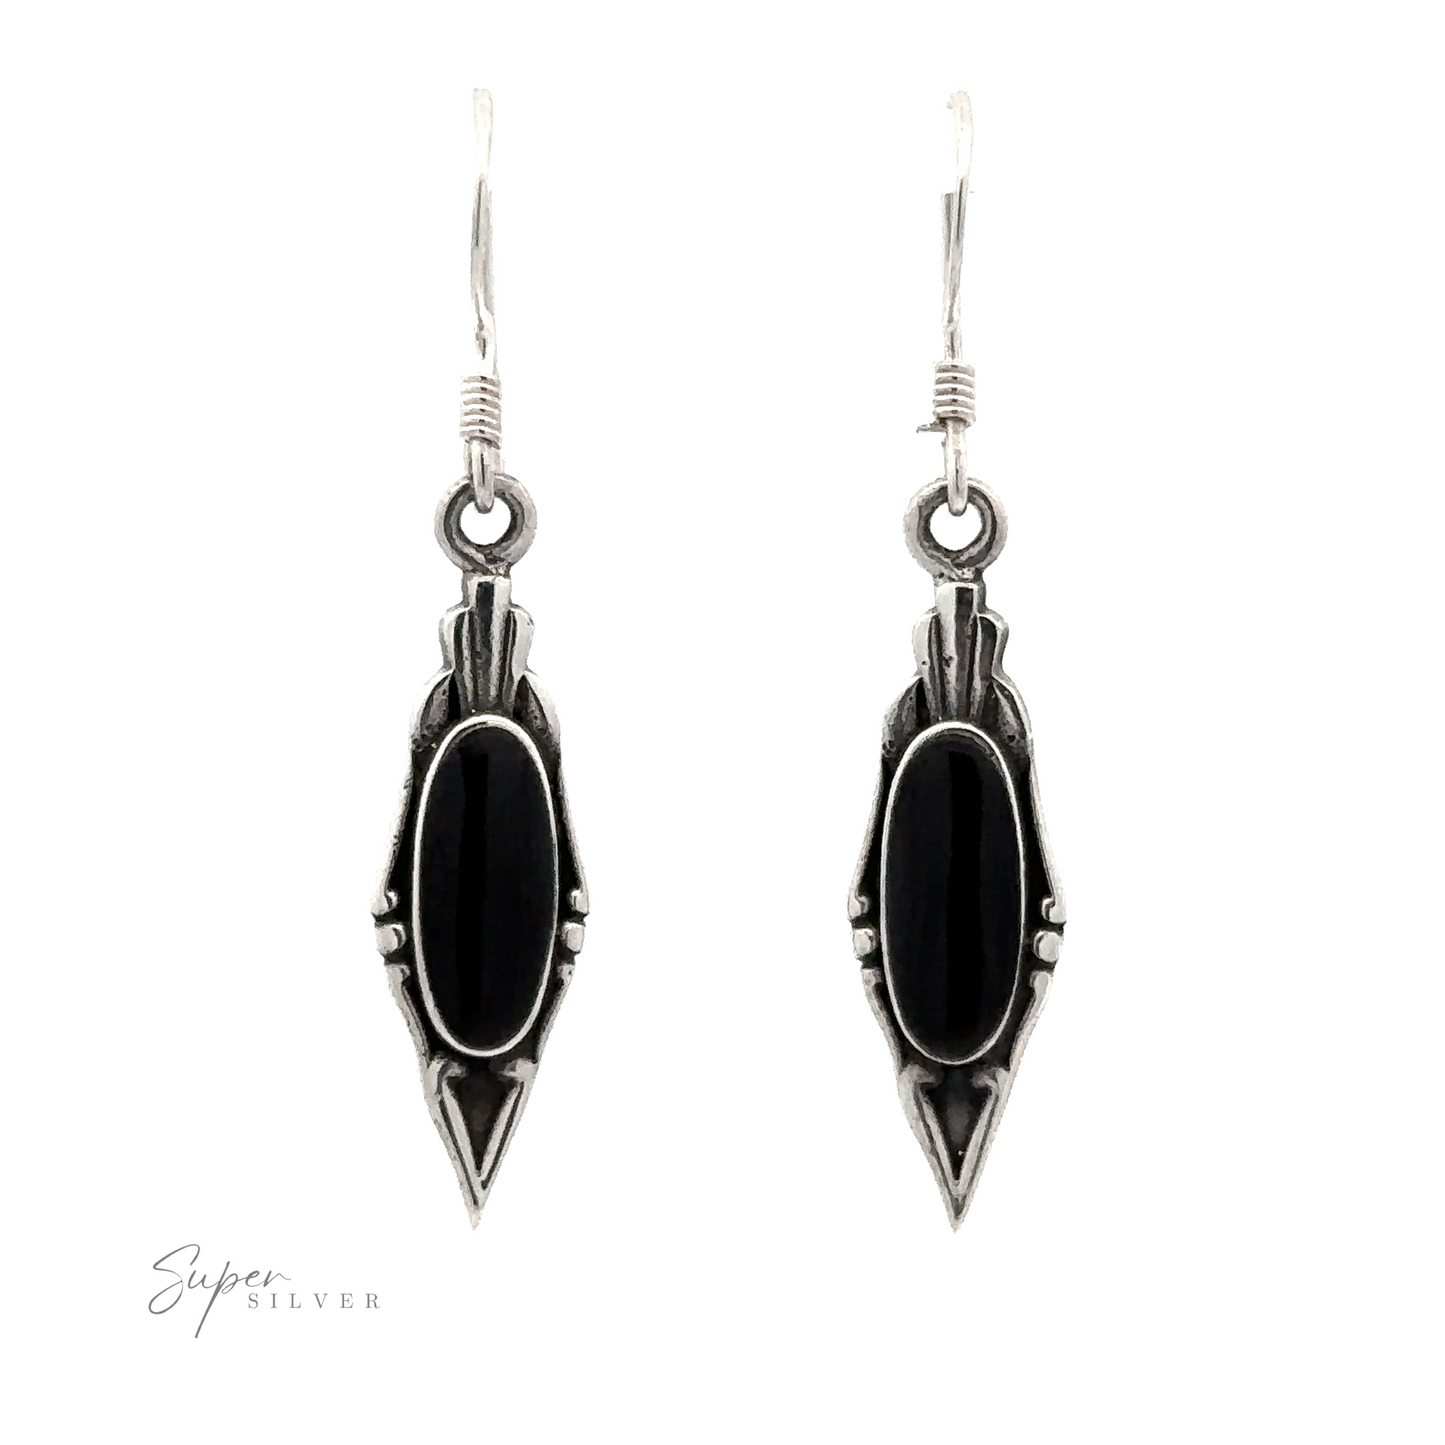 
                  
                    A pair of Elegant Inlaid Earrings with Oval Stone in the center, featuring an elongated, intricate vintage design. Signature "Super Silver" visible in the lower-left corner.
                  
                